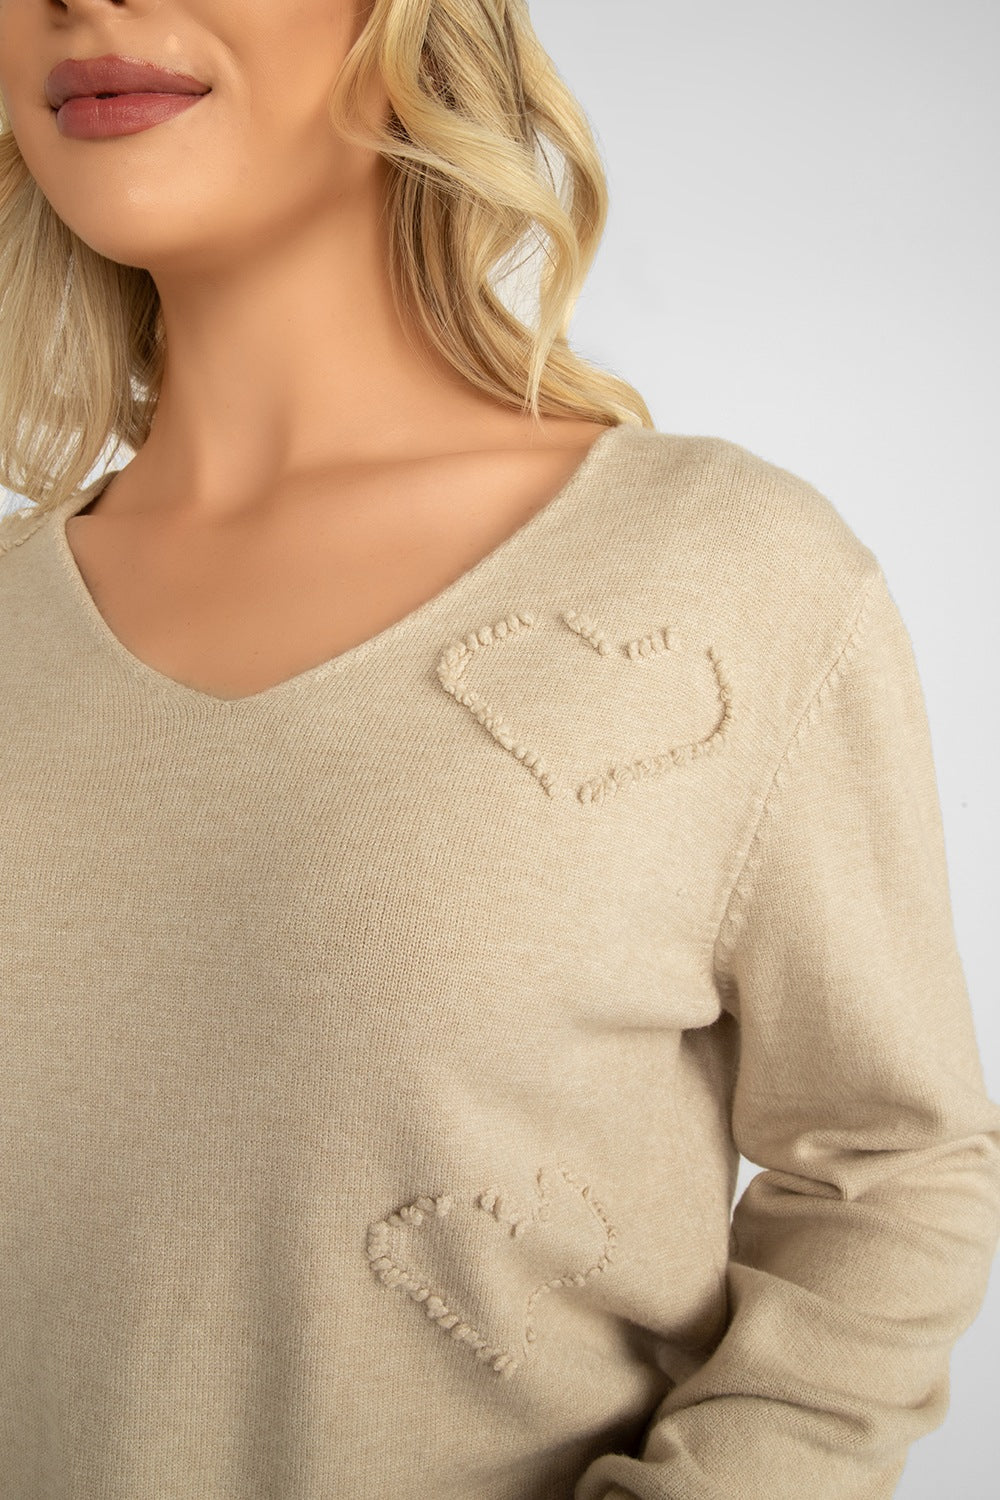 Women's Clothing FEMME FATALE (W-64VSW) Stitched Heart Sweater in CREAM